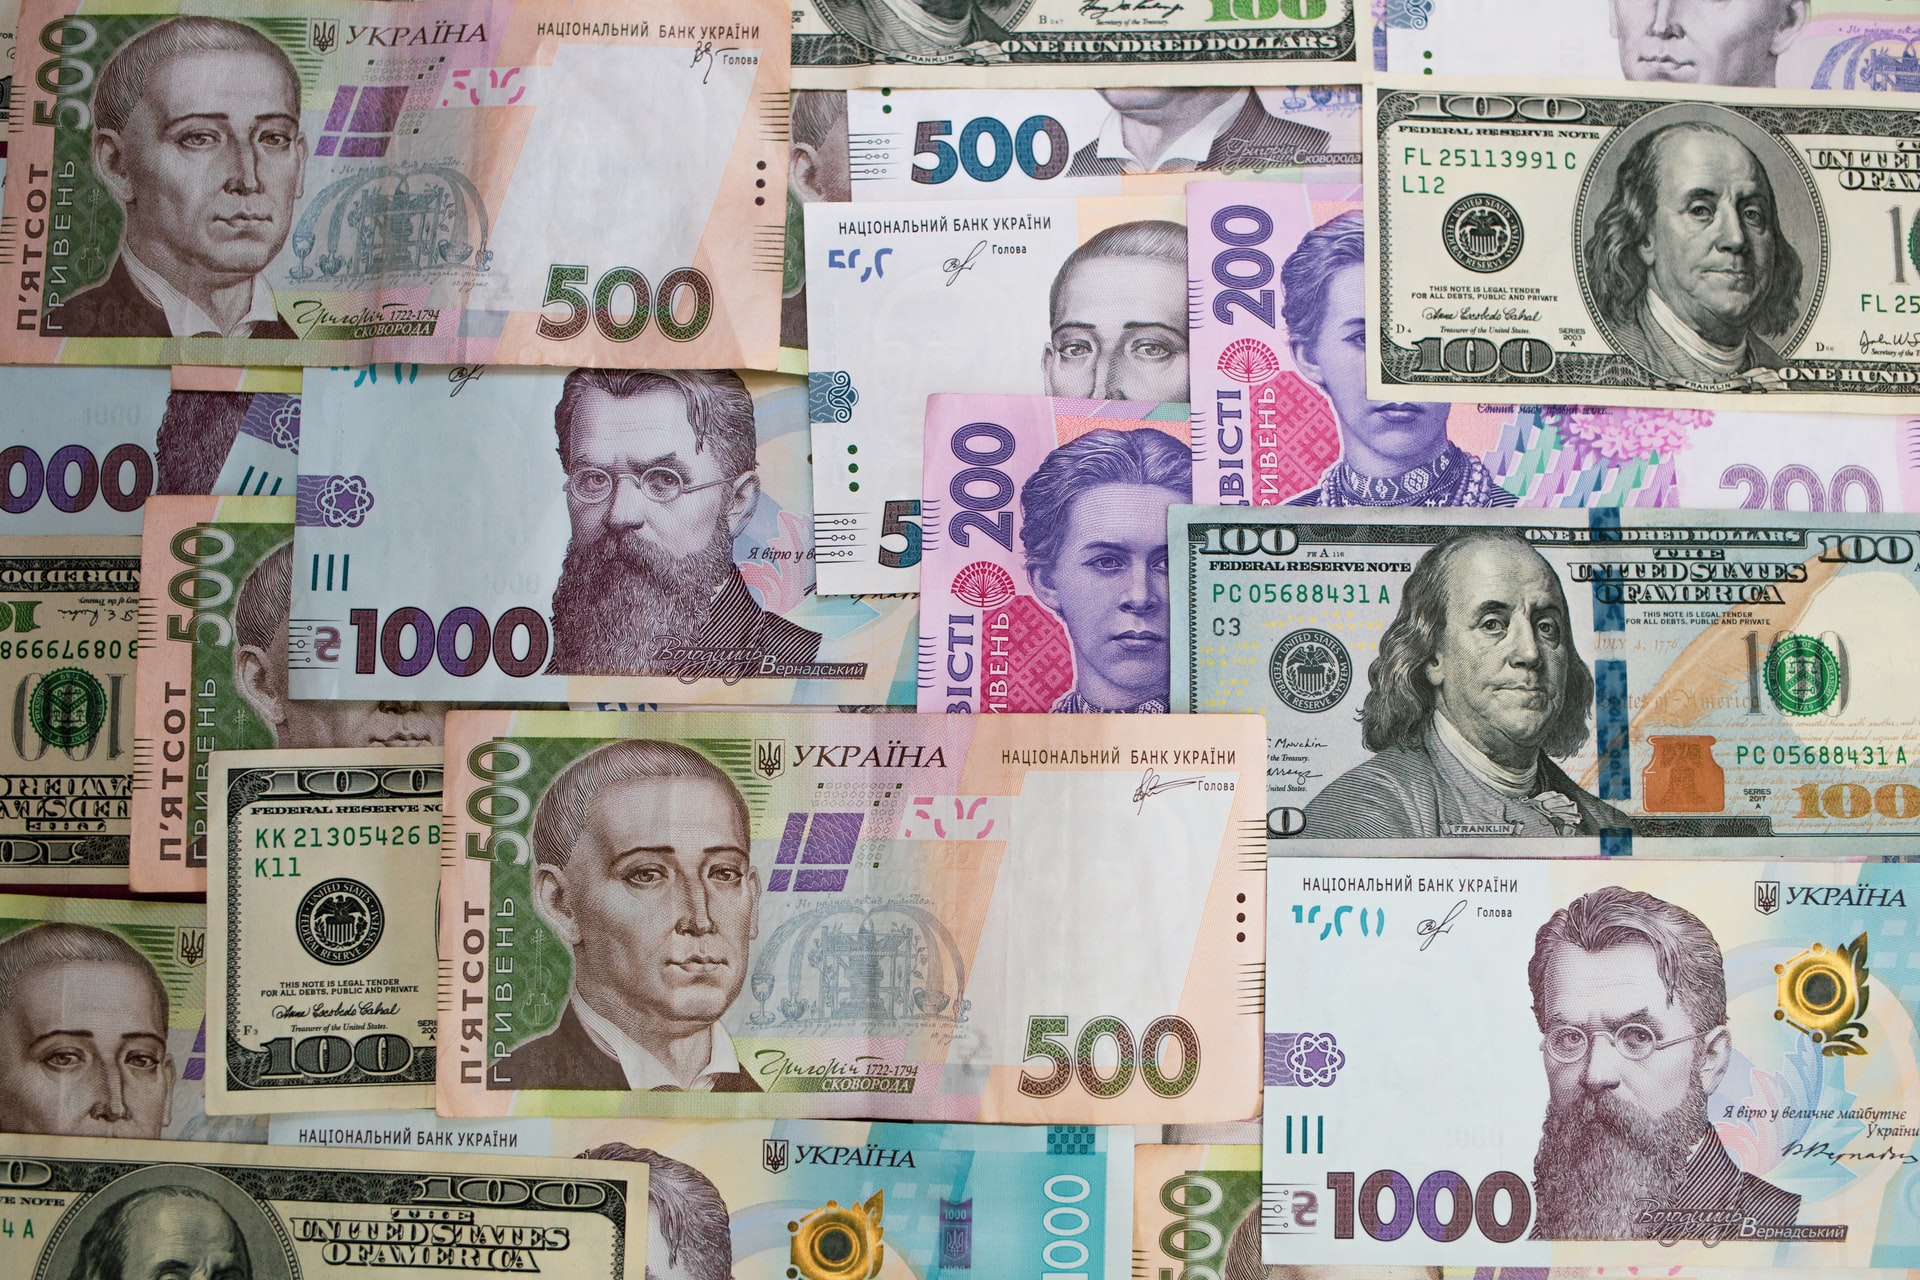 A collection of the world’s currencies.